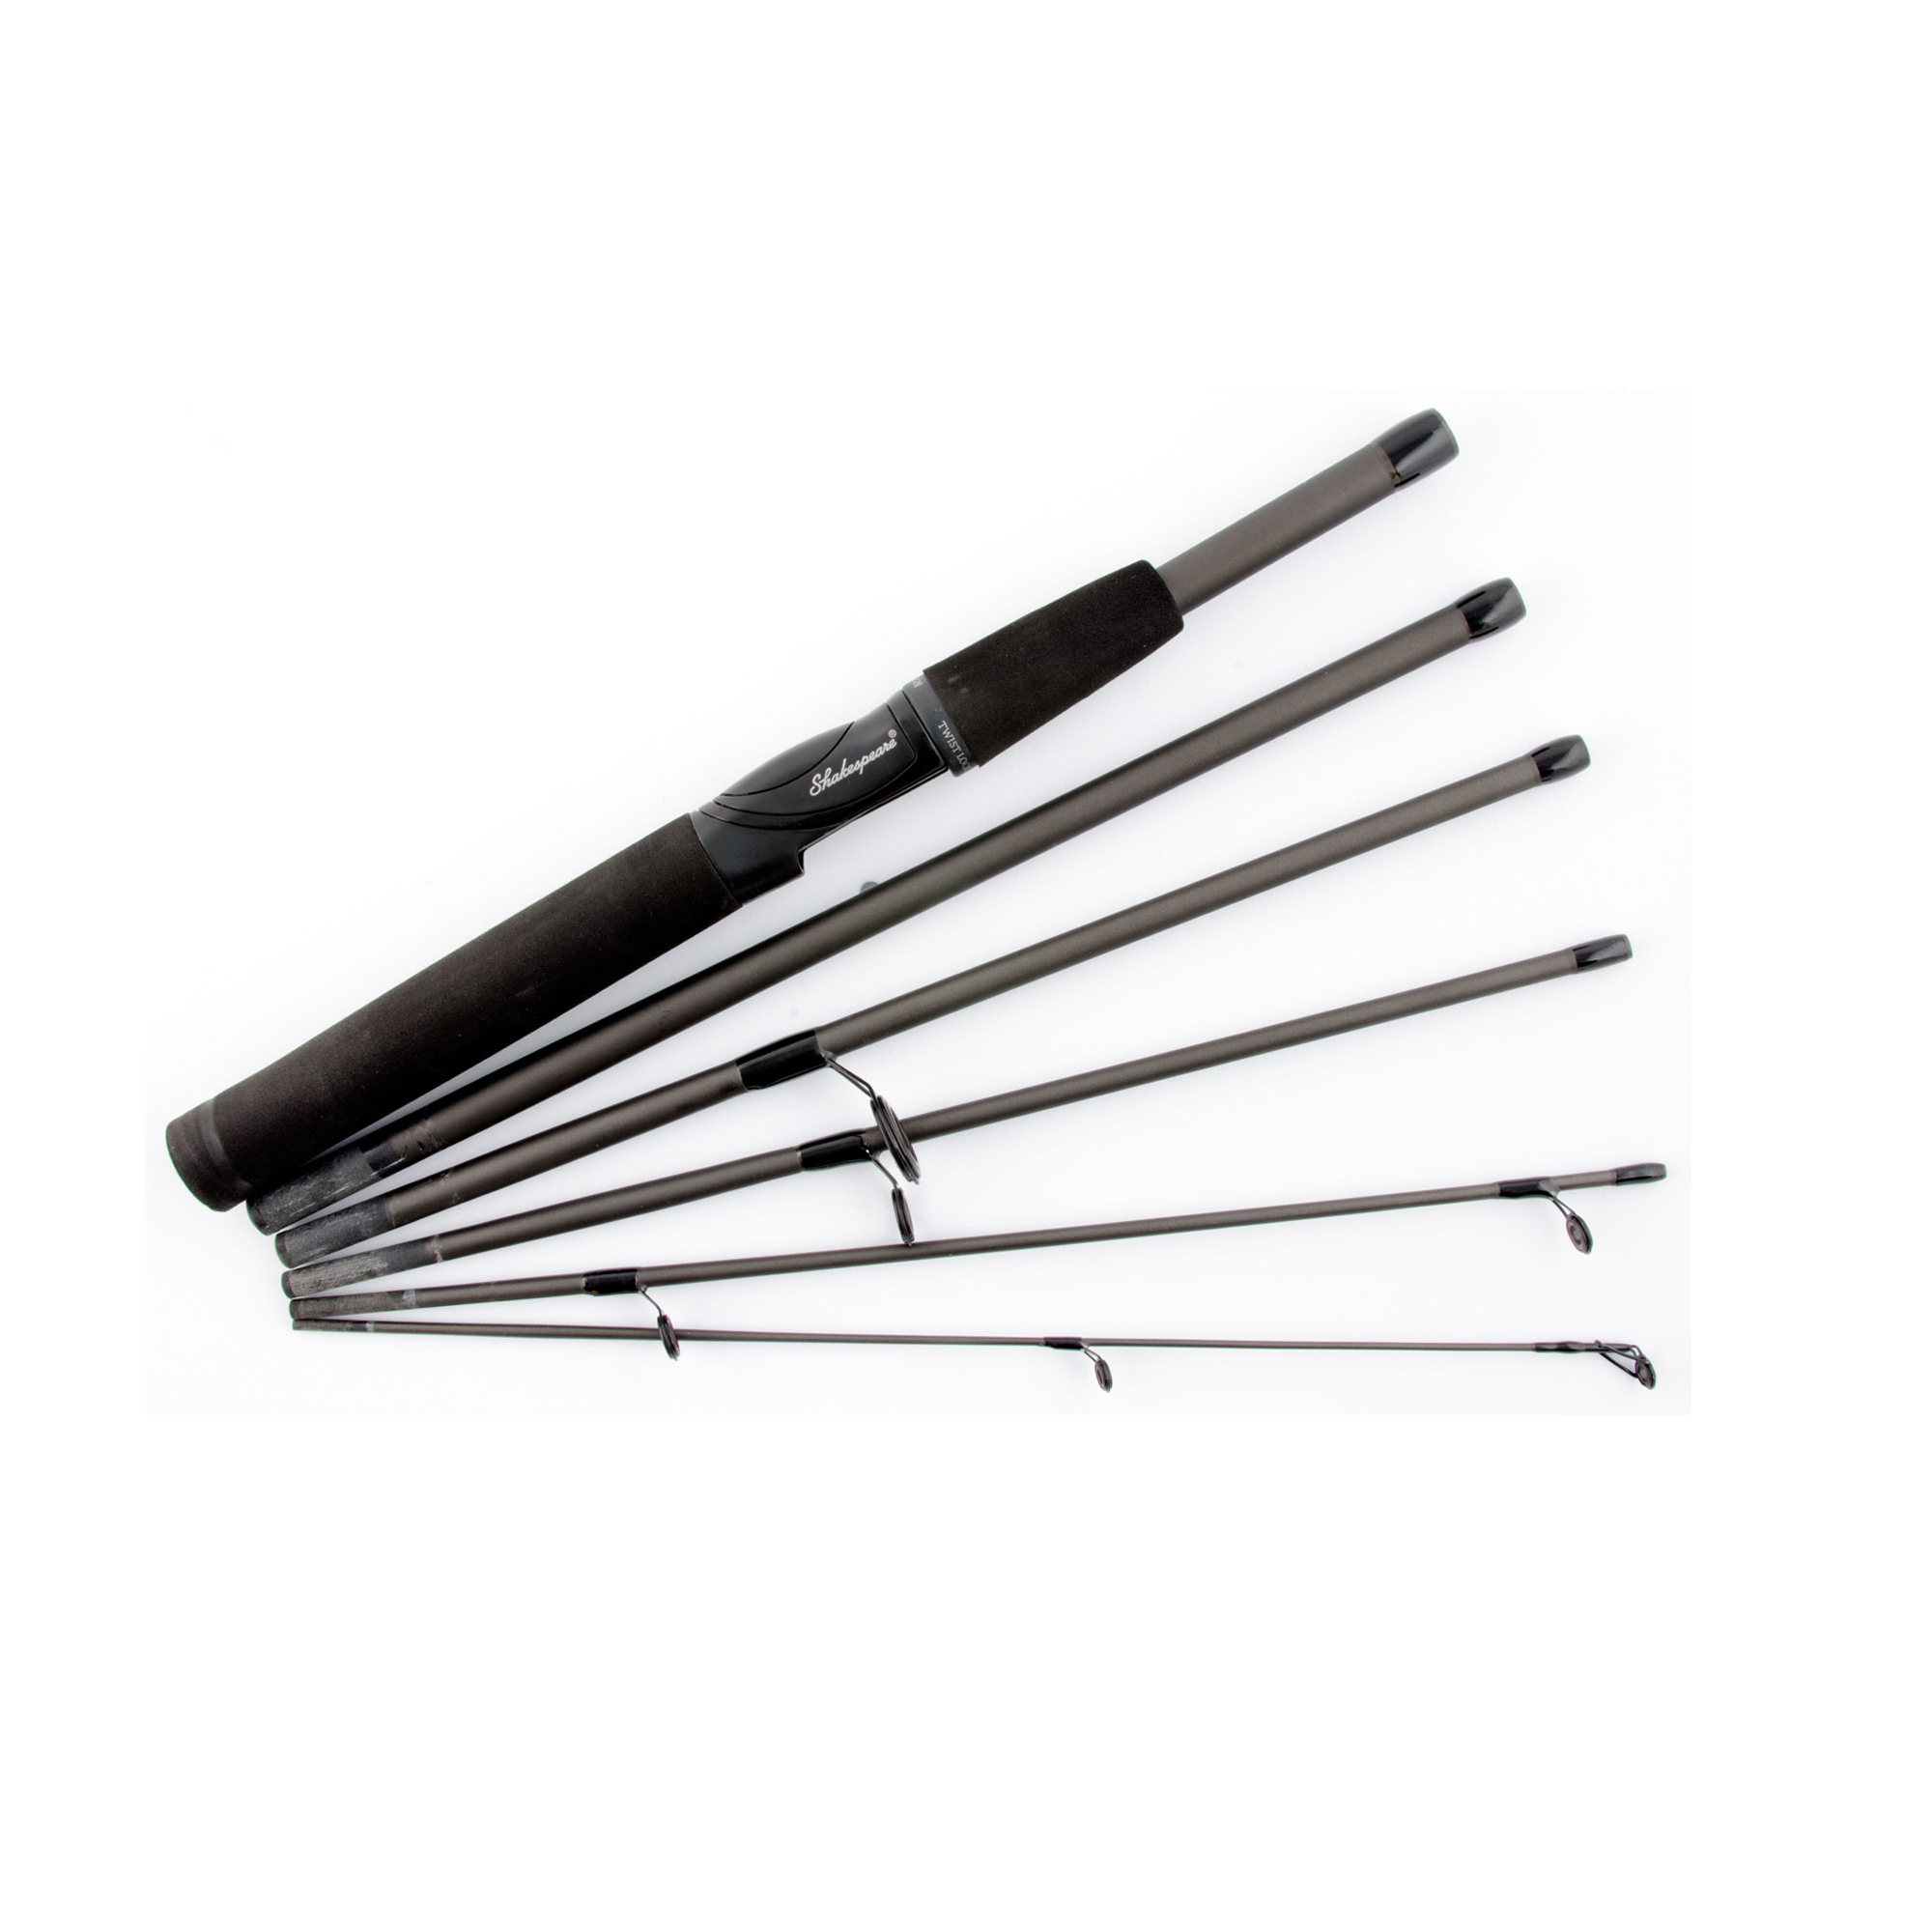 Shakespeare 6'6" Travel Mate Pack Rod, 6-Piece - image 2 of 2